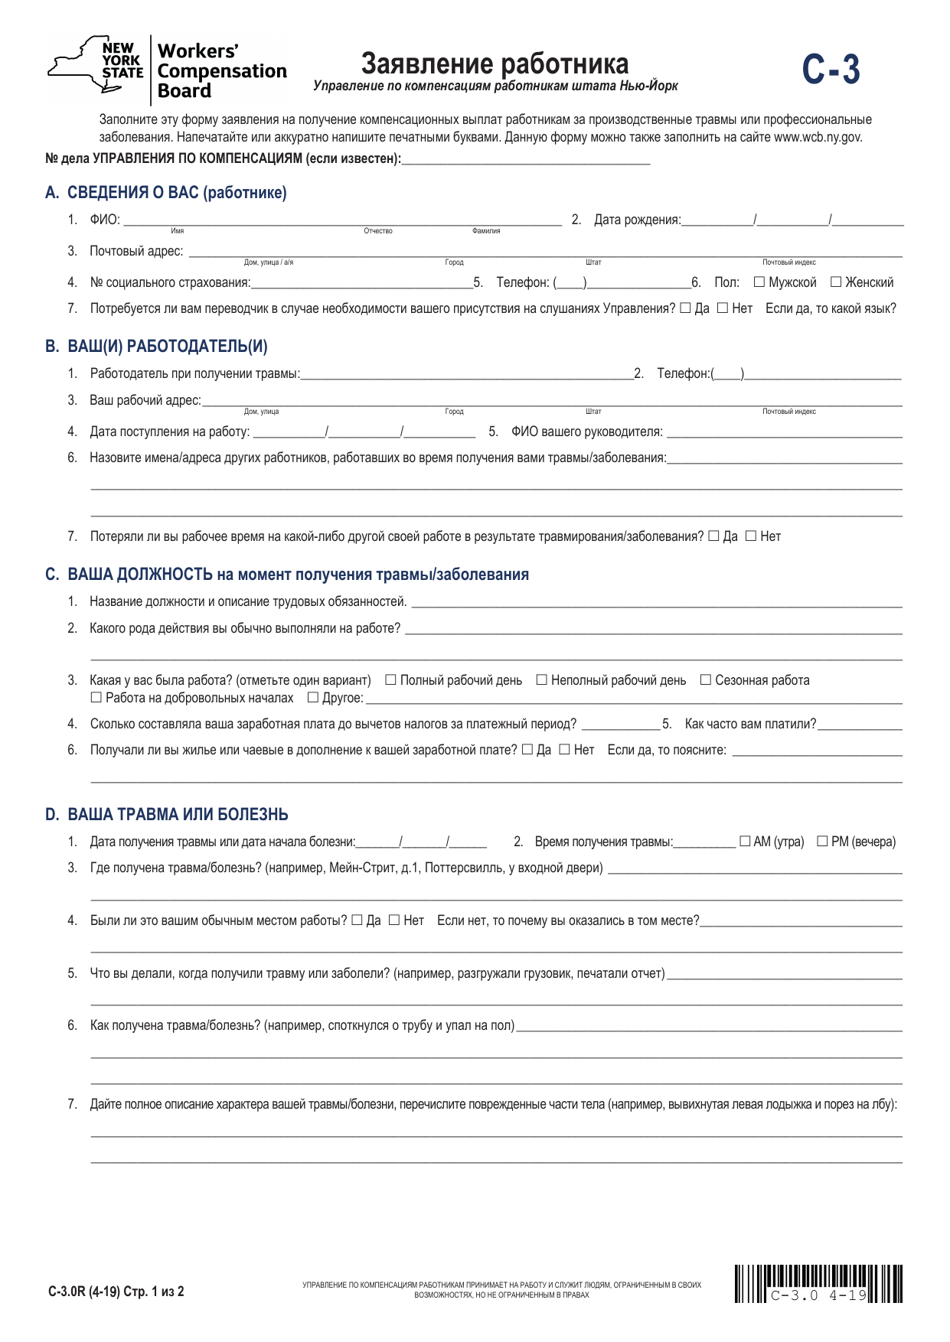 Form C-3R Employee Claim - New York (Russian), Page 1